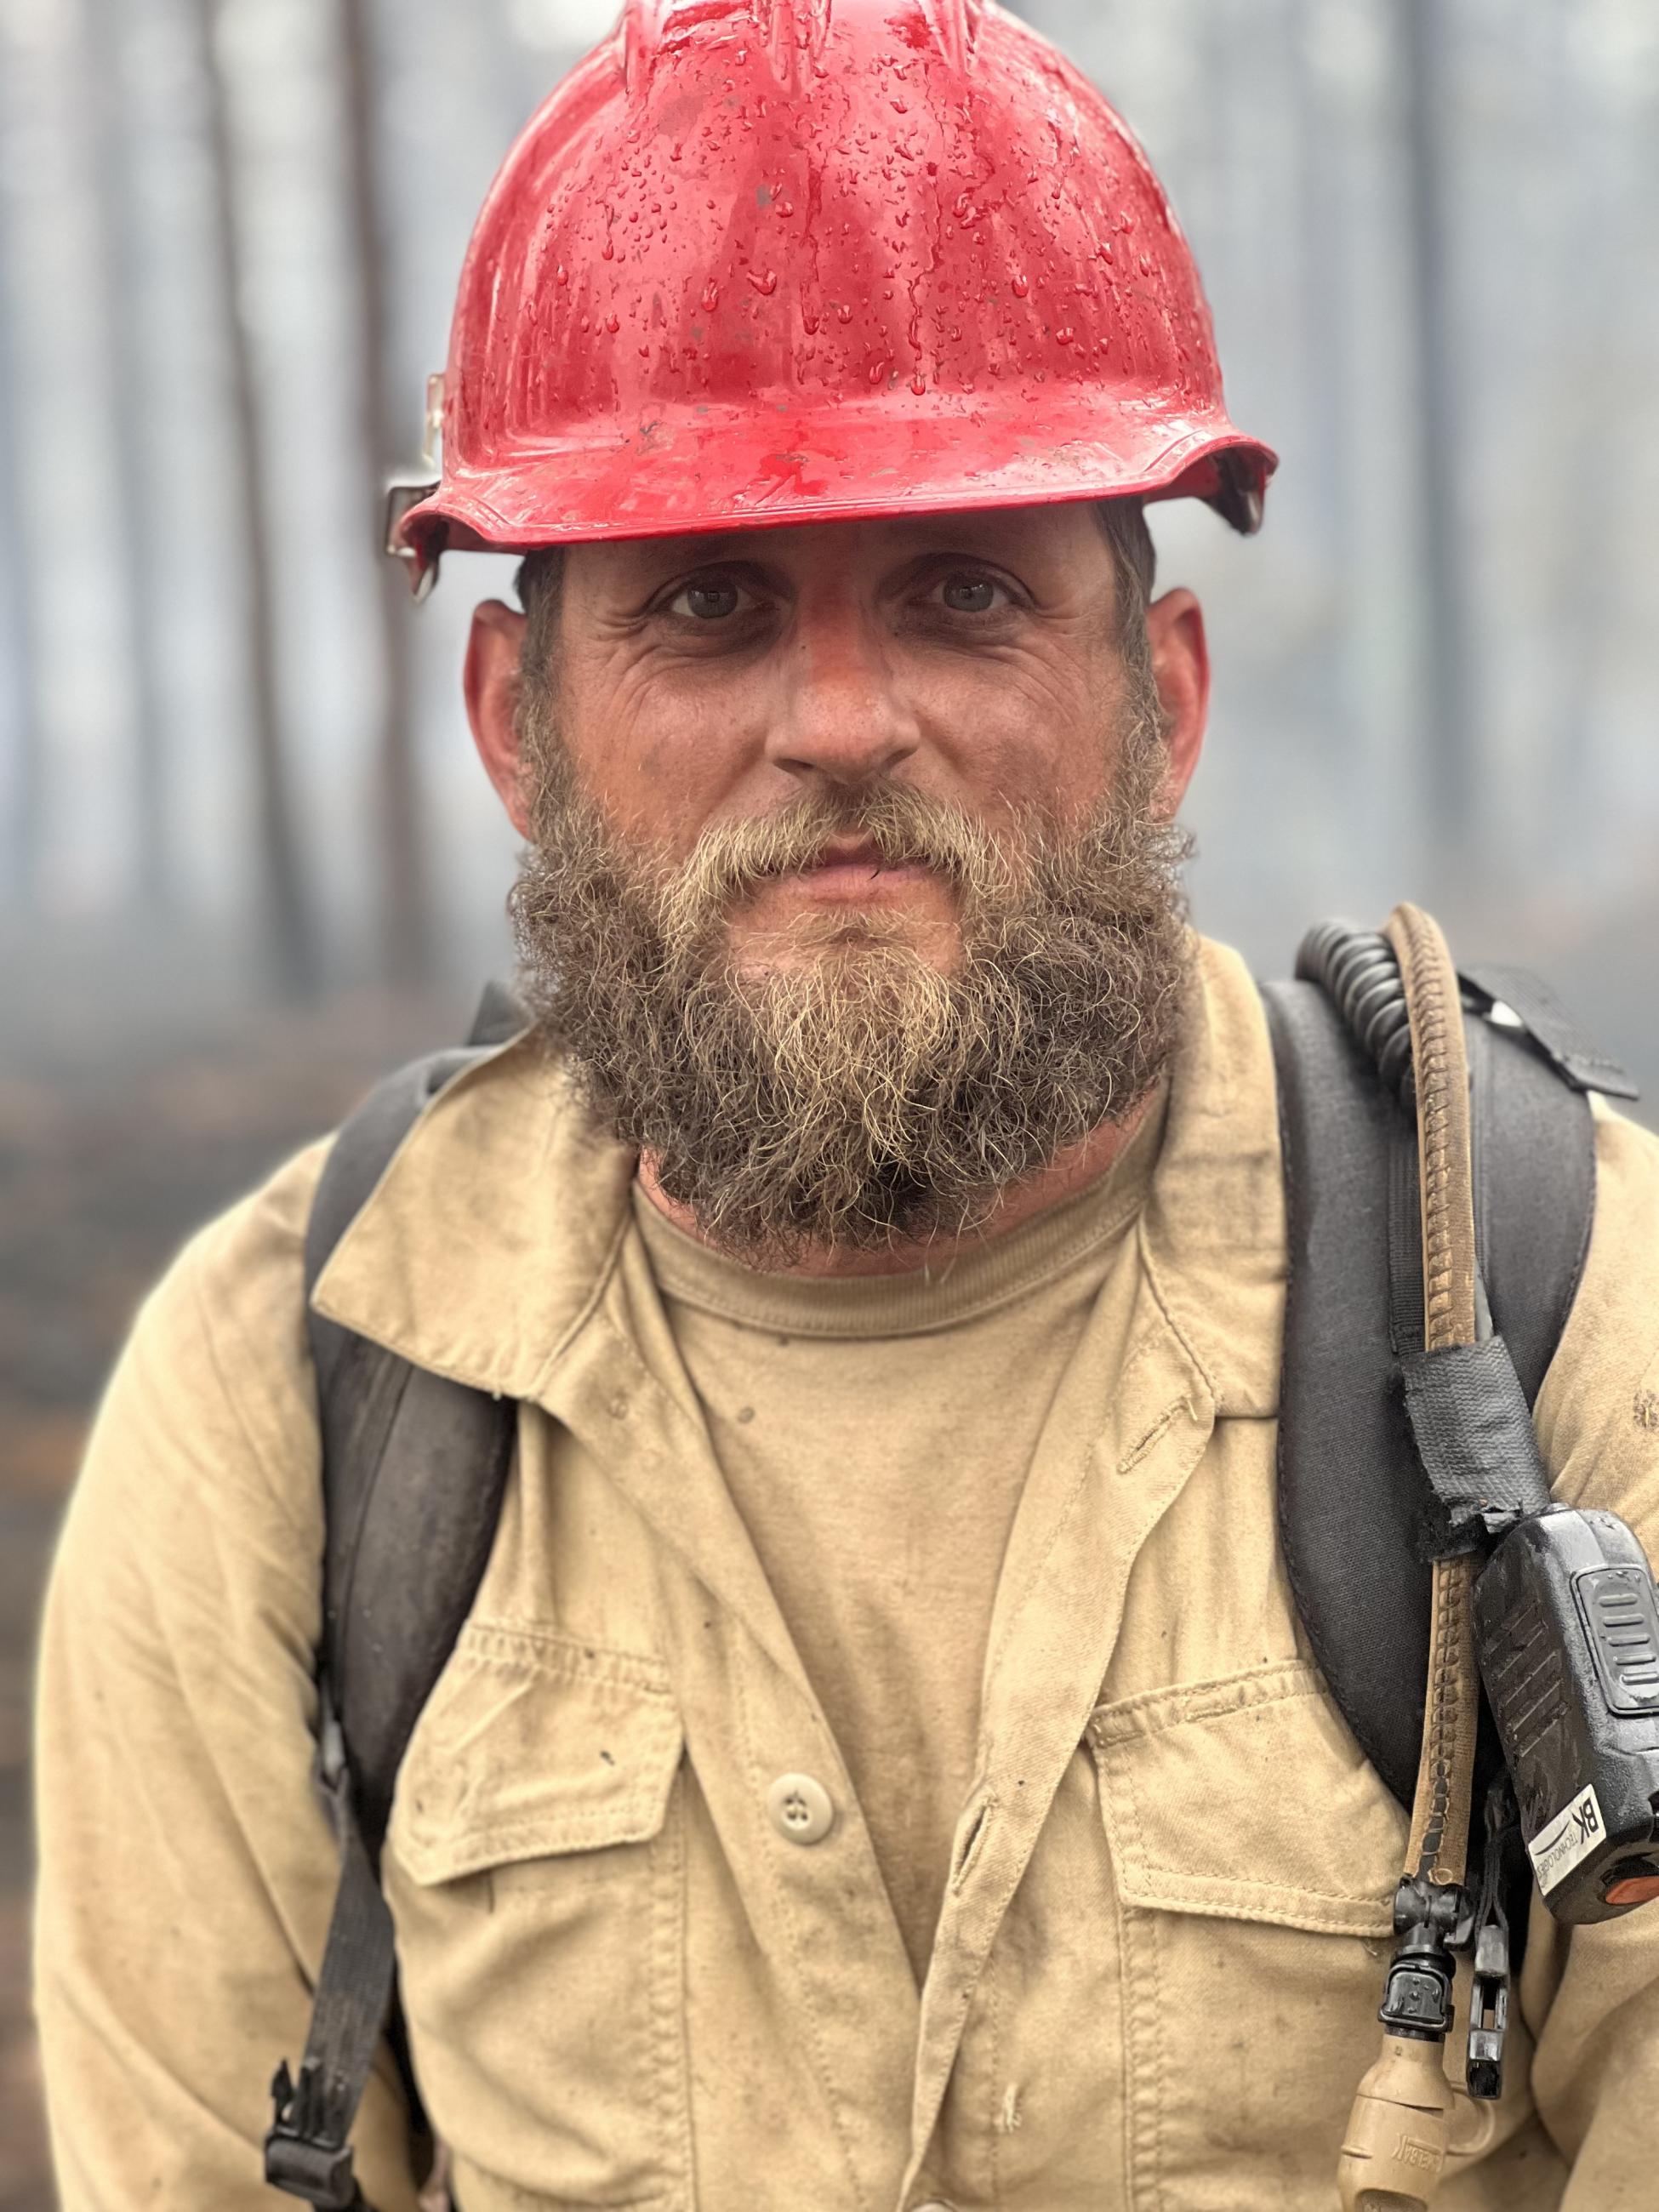 A firefighter in a red helmet and wearing a pack is shown.